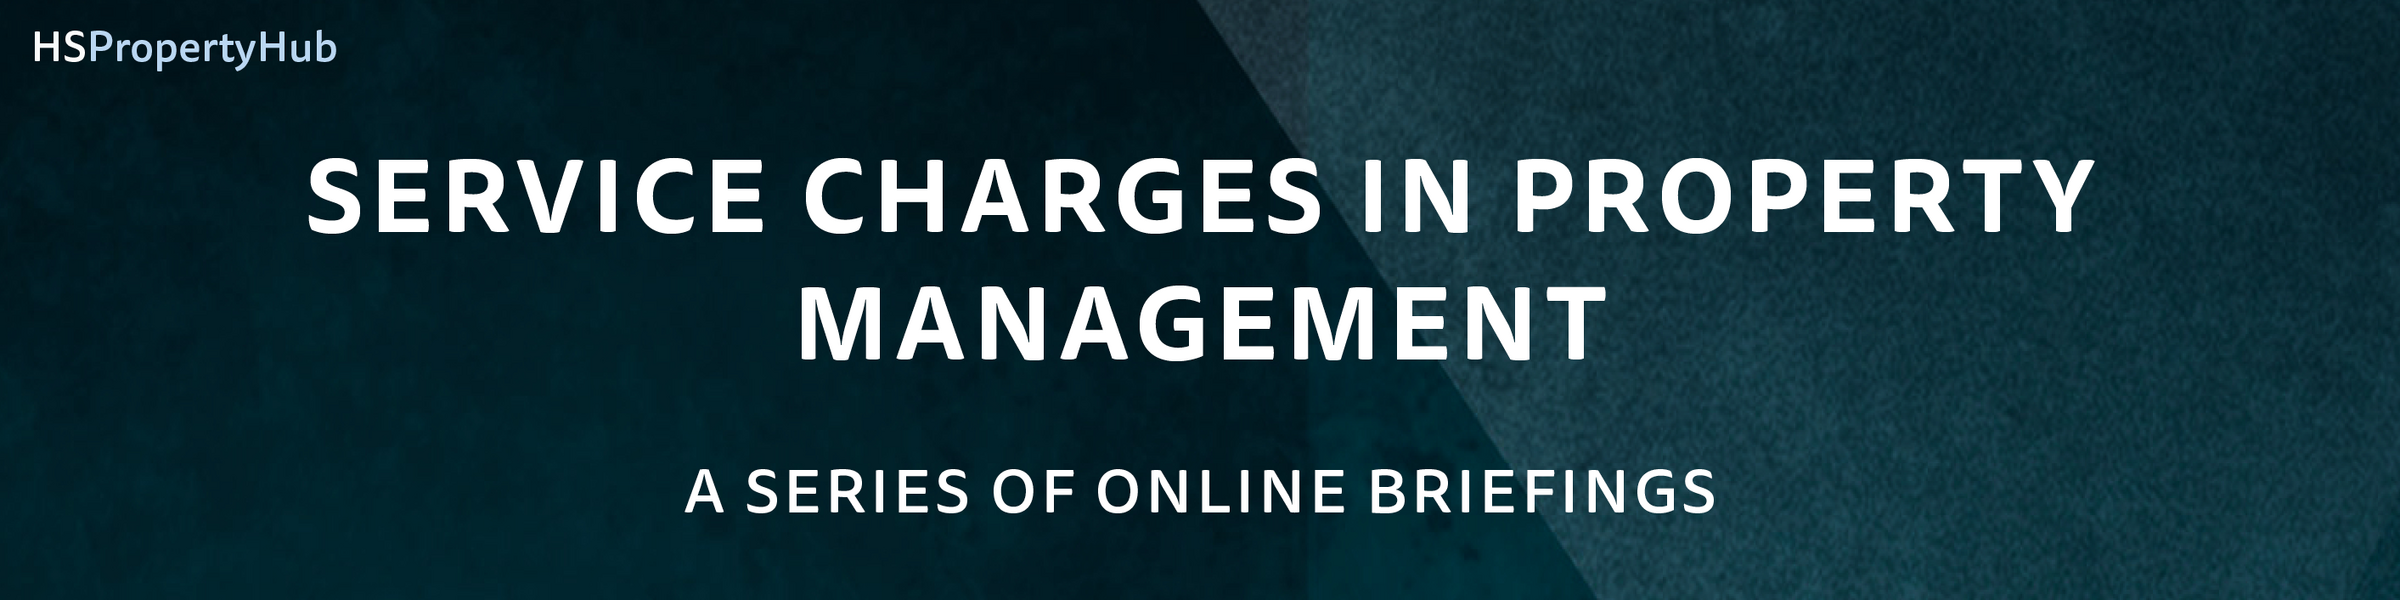 Service Charges in Property Management